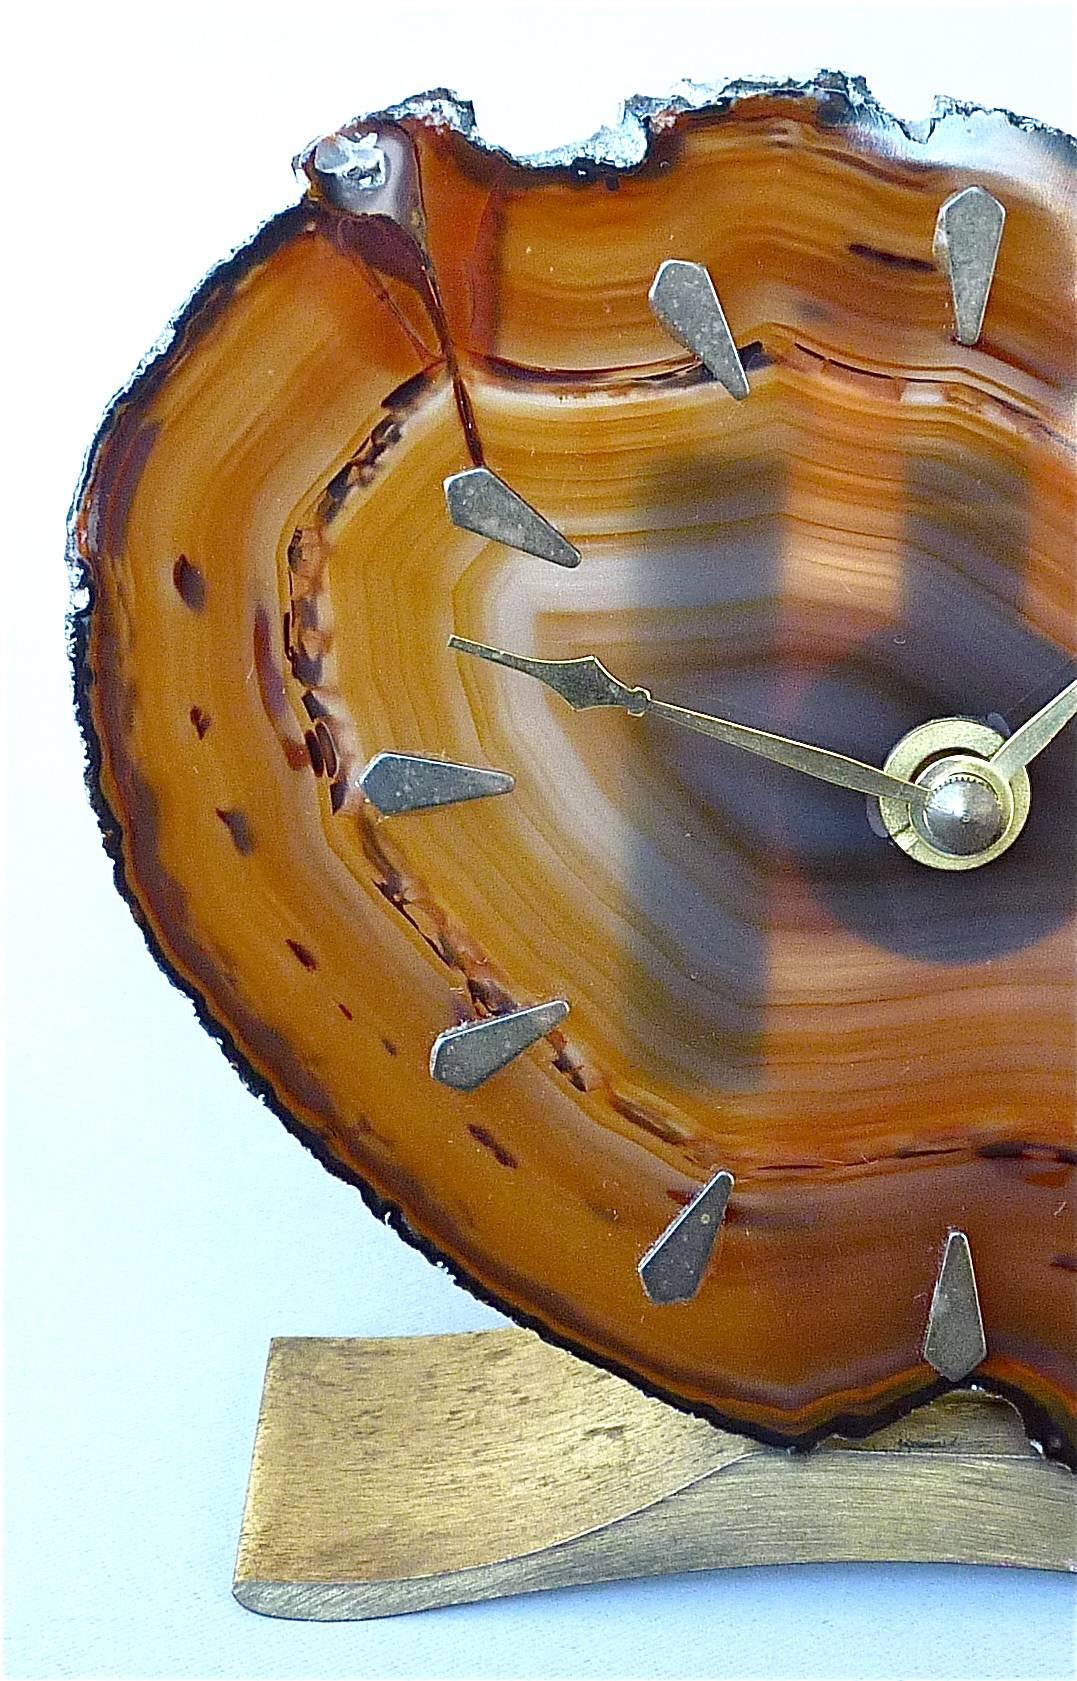 Beautiful sophisticated Willy Daro attribution table clock, Belgium and Germany, circa 1970s. It has a lovely amber to honey color Agate (polished stone) face with 12 hour brass markings mounted on a patinated brushed brass base. It runs perfectly